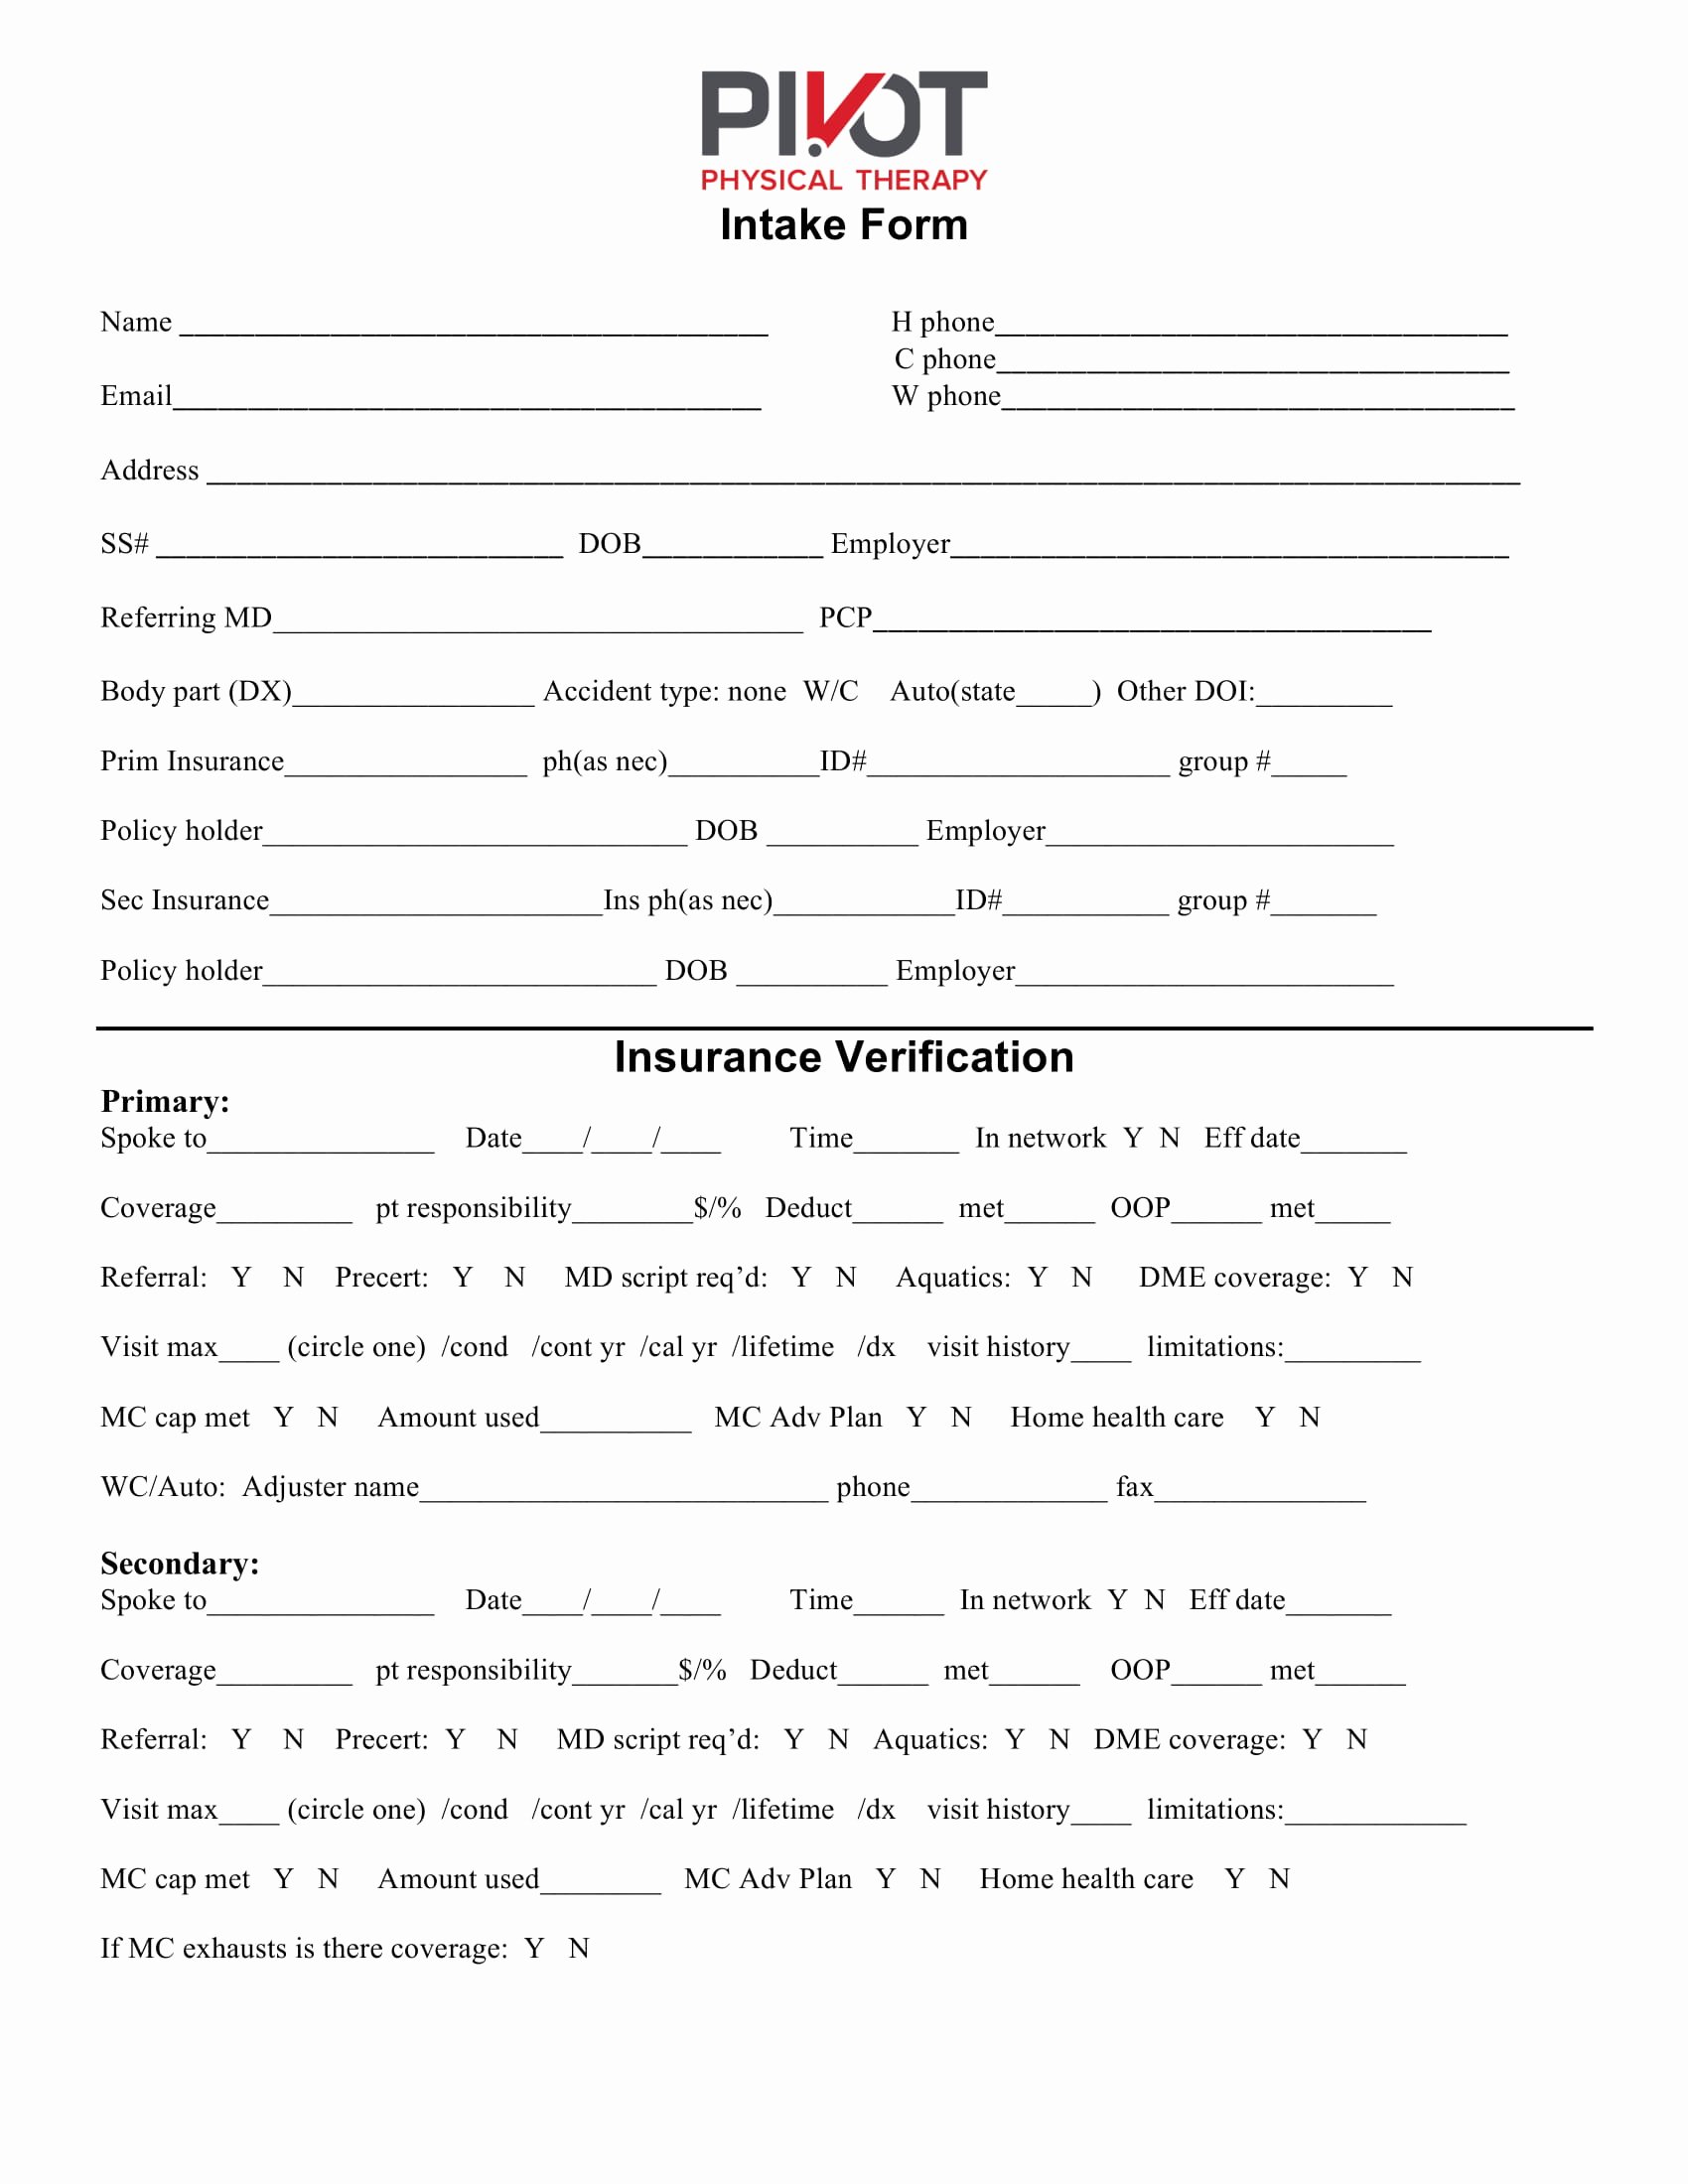 Physical therapy forms Template Inspirational 5 Physical therapy Intake forms Pdf Doc